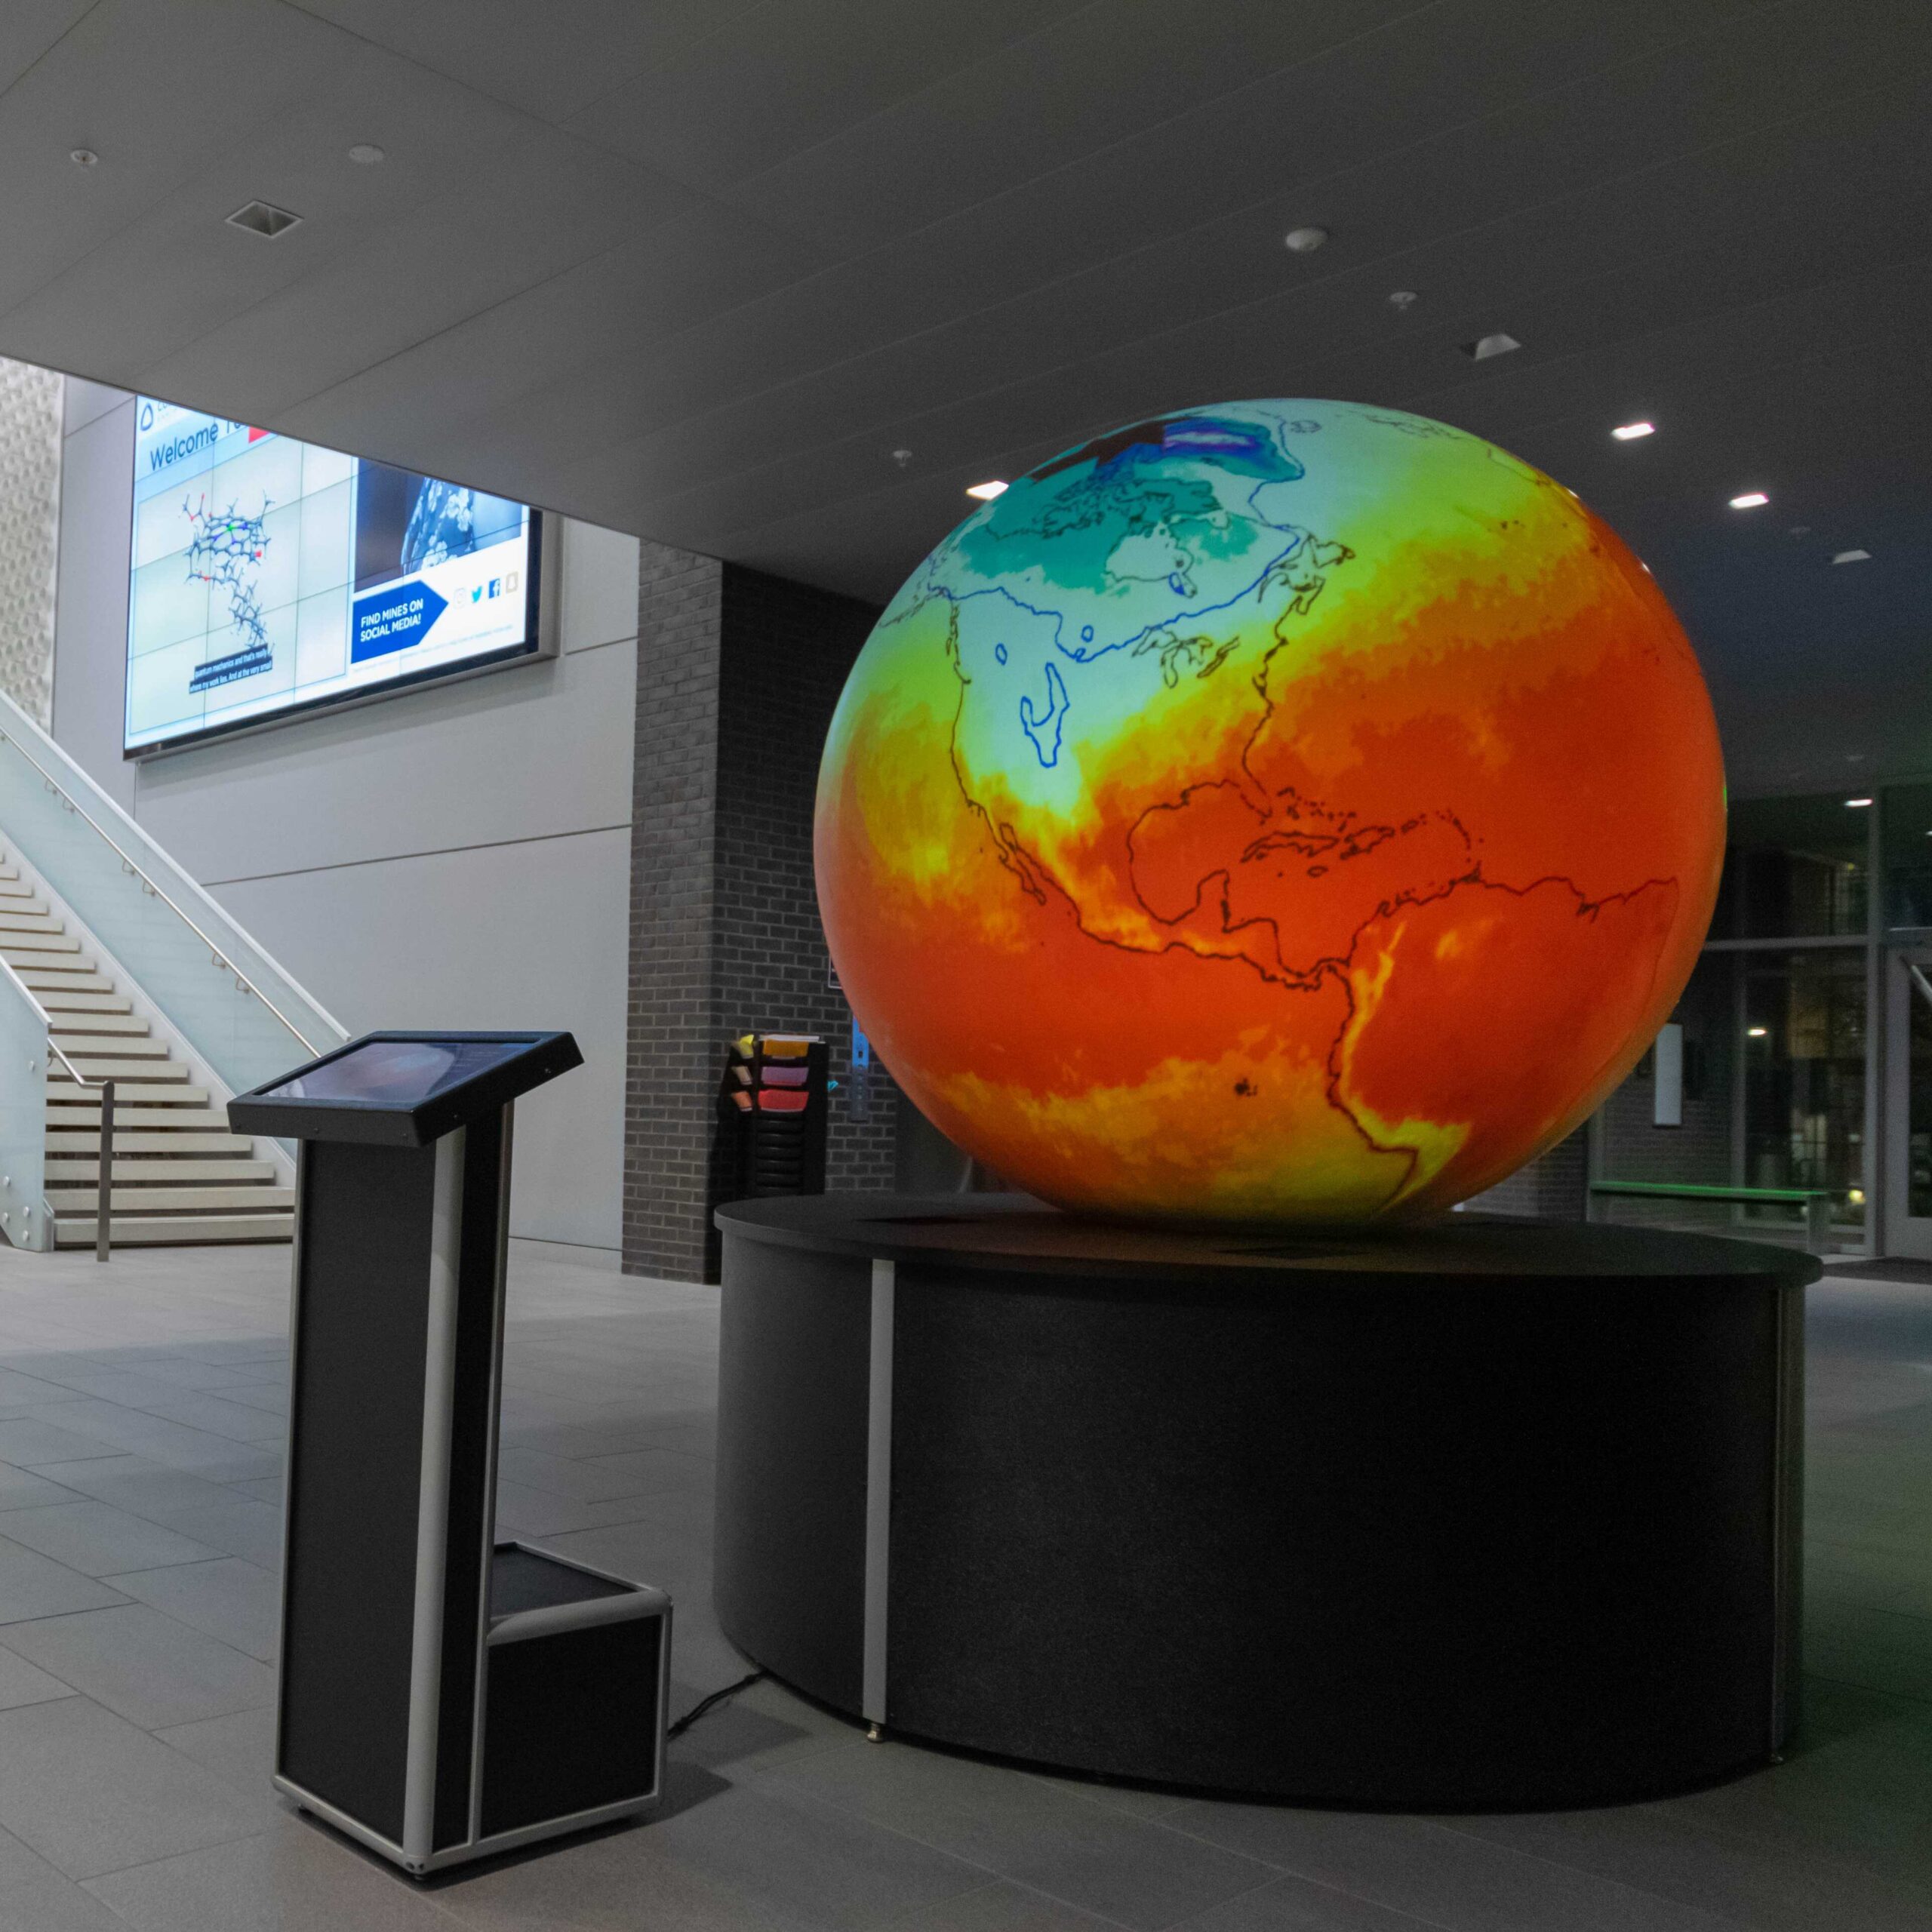 Projection of data on a globe.